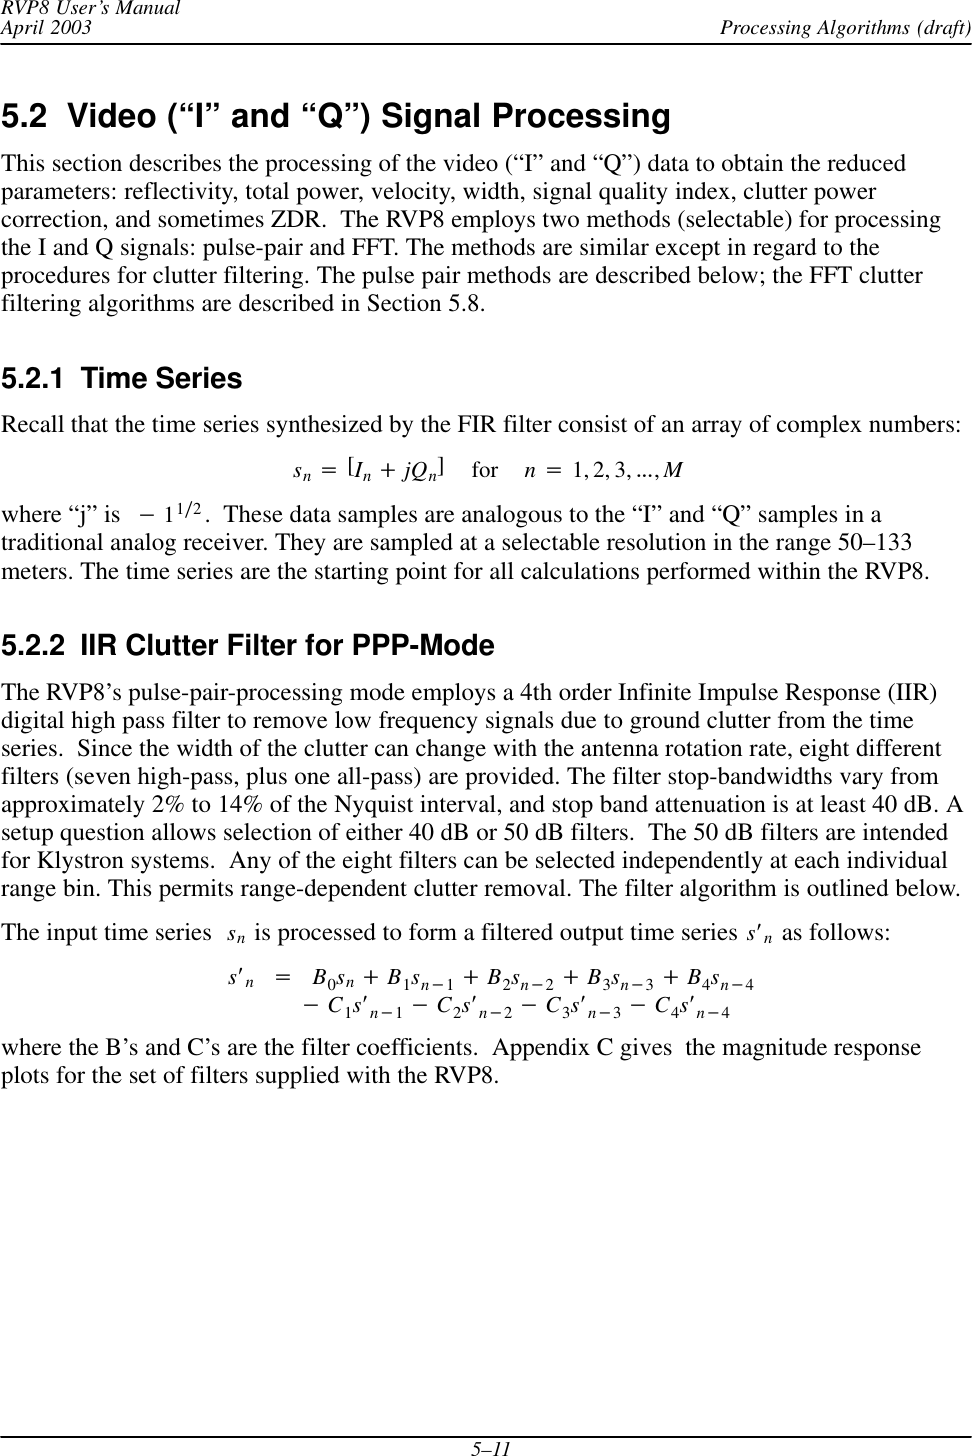 Processing Algorithms (draft)RVP8 User’s ManualApril 20035–115.2  Video (“I” and “Q”) Signal ProcessingThis section describes the processing of the video (“I” and “Q”) data to obtain the reducedparameters: reflectivity, total power, velocity, width, signal quality index, clutter powercorrection, and sometimes ZDR.  The RVP8 employs two methods (selectable) for processingthe I and Q signals: pulse-pair and FFT. The methods are similar except in regard to theprocedures for clutter filtering. The pulse pair methods are described below; the FFT clutterfiltering algorithms are described in Section 5.8.5.2.1  Time SeriesRecall that the time series synthesized by the FIR filter consist of an array of complex numbers:sn+[In)jQn]for n+1, 2, 3, AAA,Mwhere “j” is *11ń2.  These data samples are analogous to the “I” and “Q” samples in atraditional analog receiver. They are sampled at a selectable resolution in the range 50–133meters. The time series are the starting point for all calculations performed within the RVP8.5.2.2  IIR Clutter Filter for PPP-ModeThe RVP8’s pulse-pair-processing mode employs a 4th order Infinite Impulse Response (IIR)digital high pass filter to remove low frequency signals due to ground clutter from the timeseries.  Since the width of the clutter can change with the antenna rotation rate, eight differentfilters (seven high-pass, plus one all-pass) are provided. The filter stop-bandwidths vary fromapproximately 2% to 14% of the Nyquist interval, and stop band attenuation is at least 40 dB. Asetup question allows selection of either 40 dB or 50 dB filters.  The 50 dB filters are intendedfor Klystron systems.  Any of the eight filters can be selected independently at each individualrange bin. This permits range-dependent clutter removal. The filter algorithm is outlined below.The input time series sn is processed to form a filtered output time series sȀn as follows:sȀn+B0sn)B1sn*1)B2sn*2)B3sn*3)B4sn*4*C1sȀn*1*C2sȀn*2*C3sȀn*3*C4sȀn*4where the B’s and C’s are the filter coefficients.  Appendix C gives  the magnitude responseplots for the set of filters supplied with the RVP8.